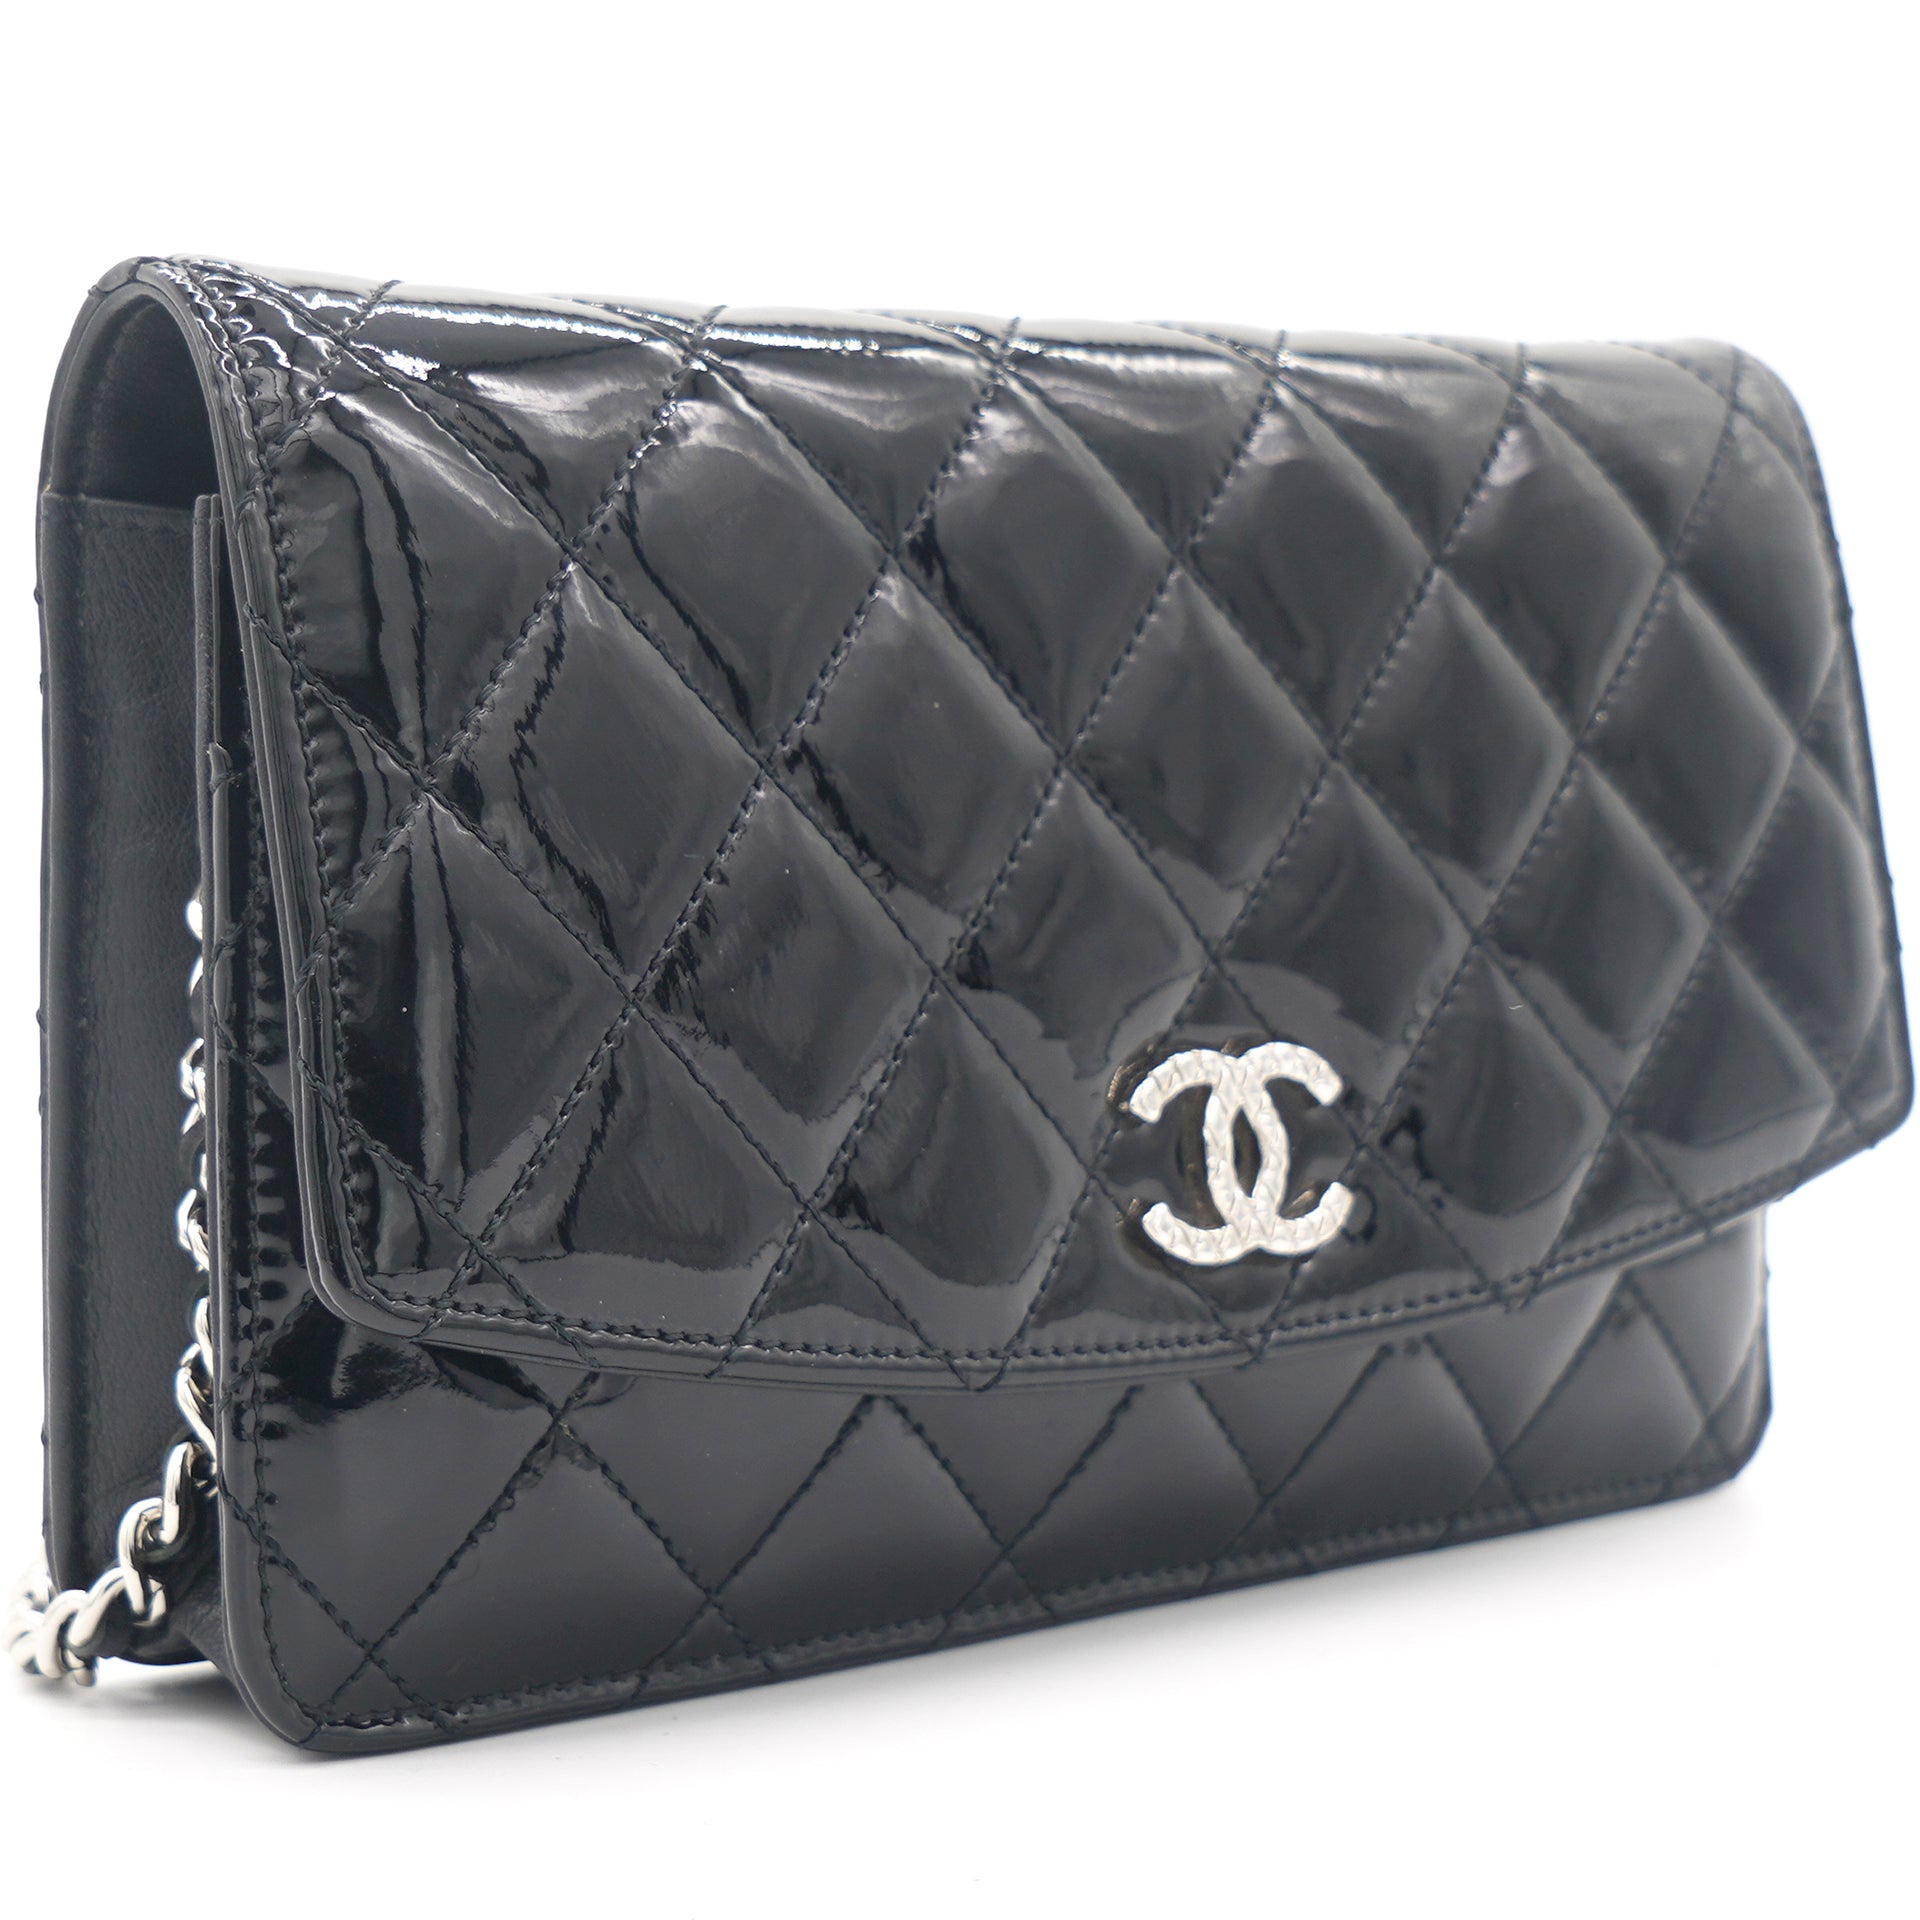 Chanel Tangerine Patent Wallet on Chain – SFN